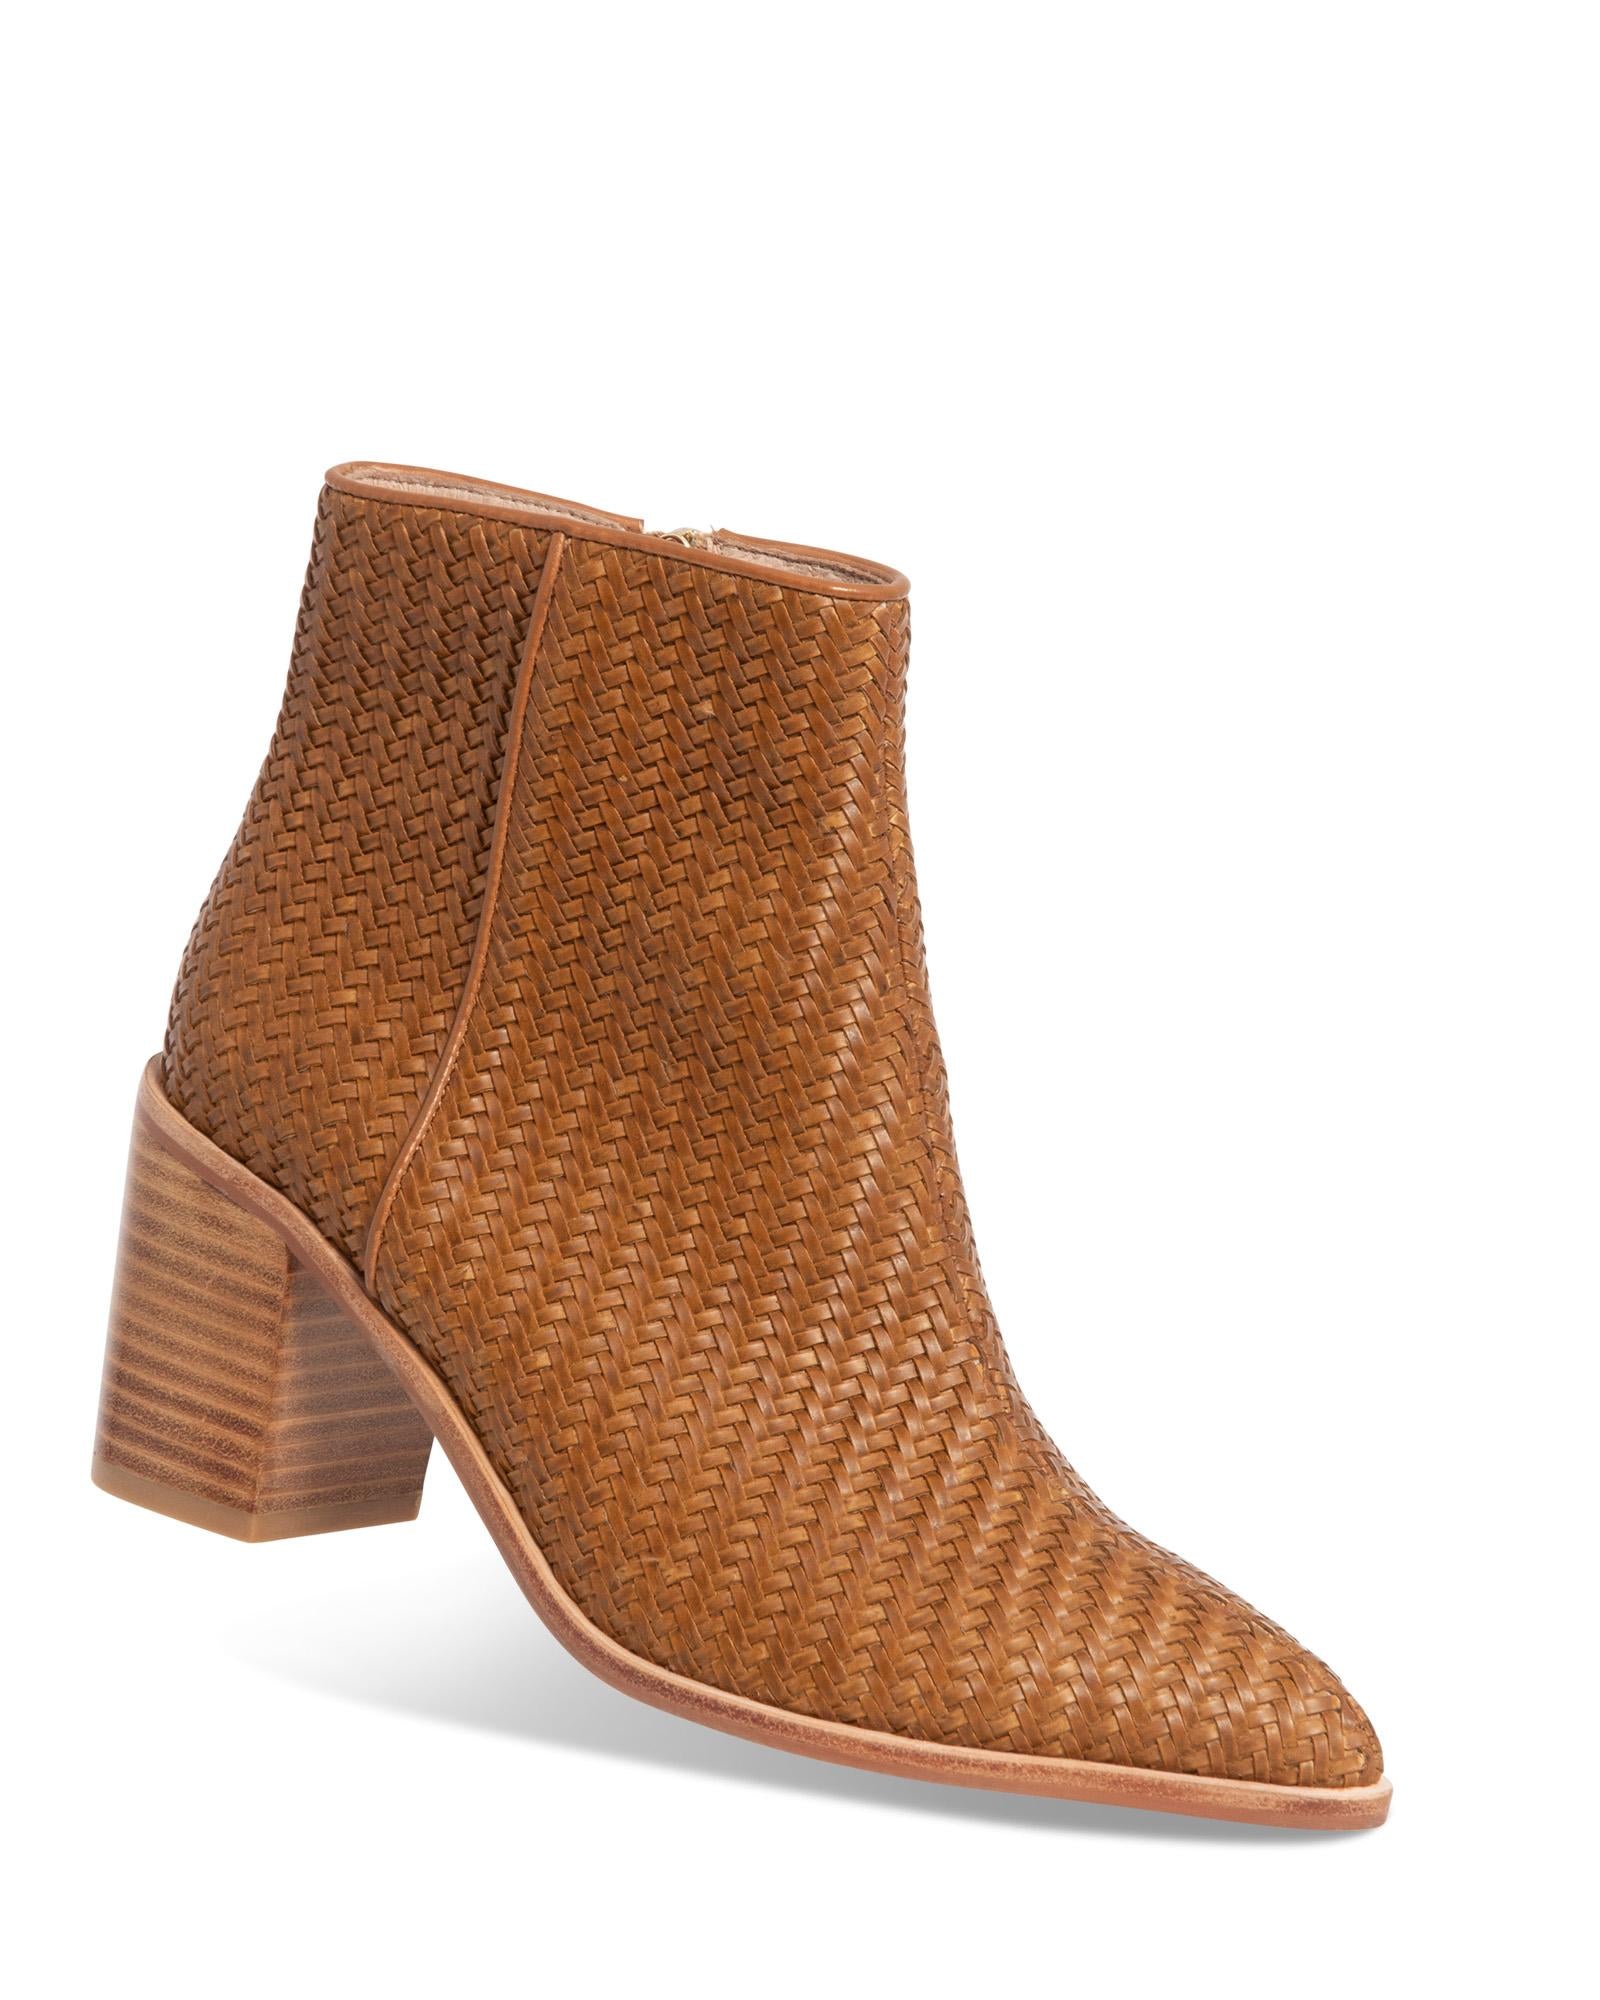 Maeve Tan Weave 7cm Ankle Boot